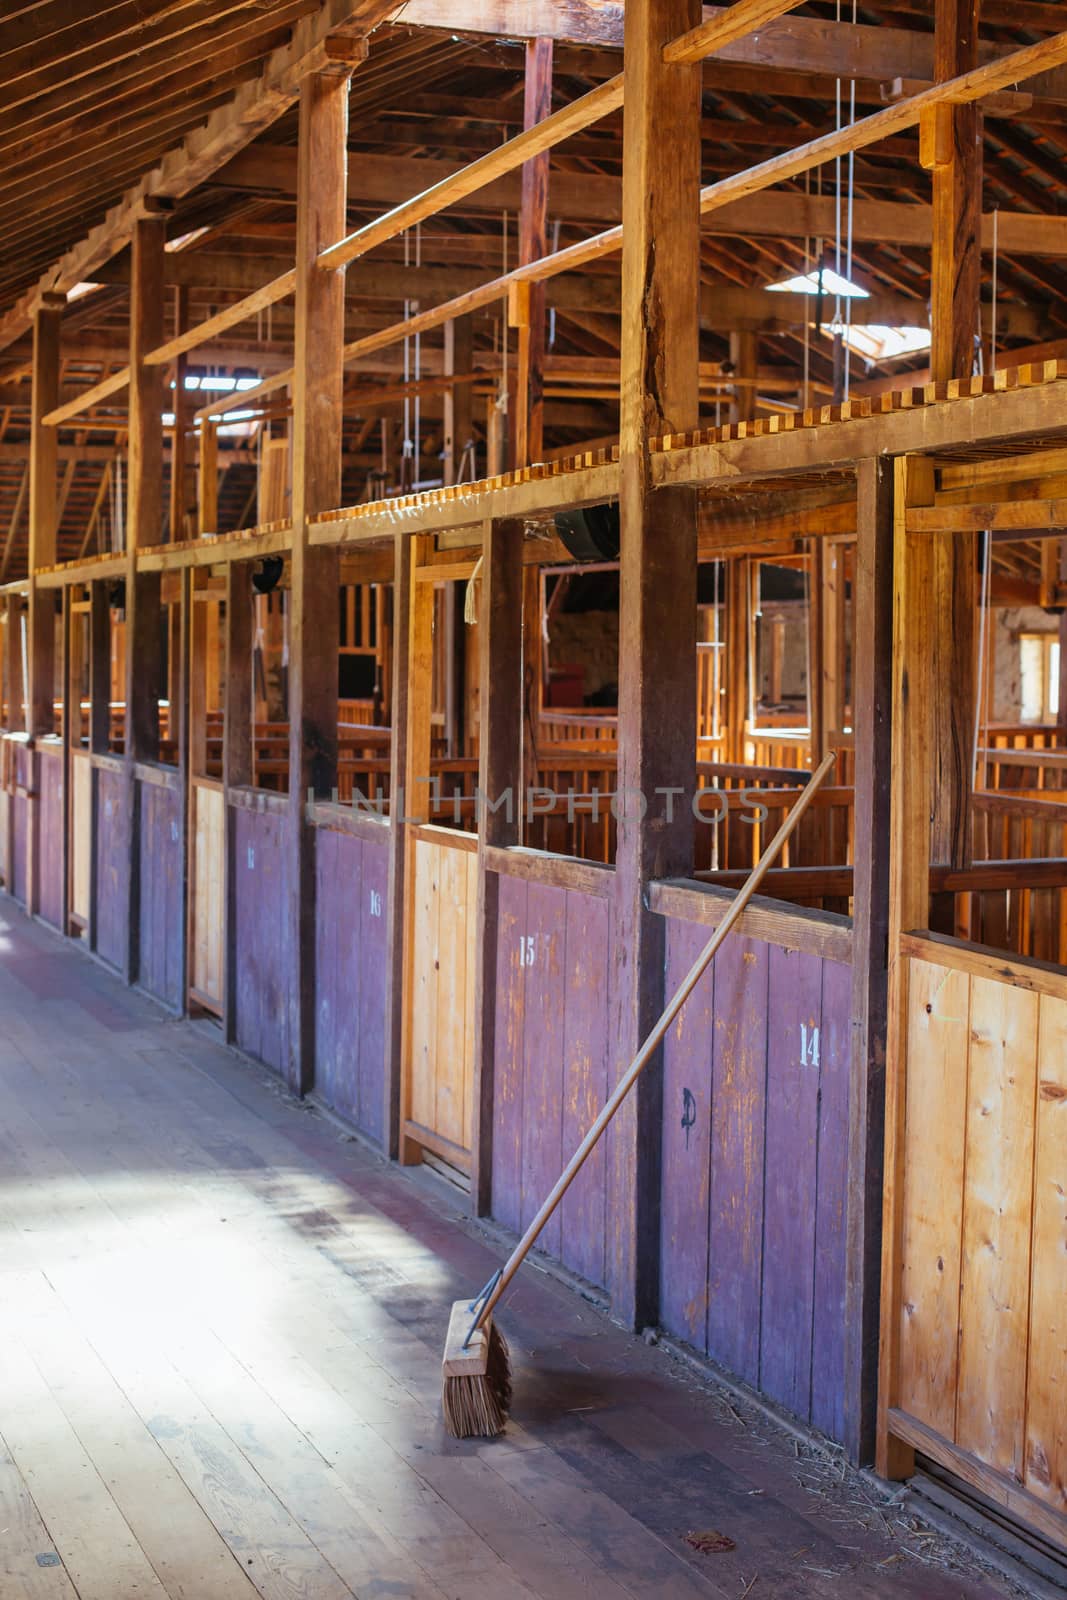 The interior of a wool shed in Melbourne, Victoria, Australia